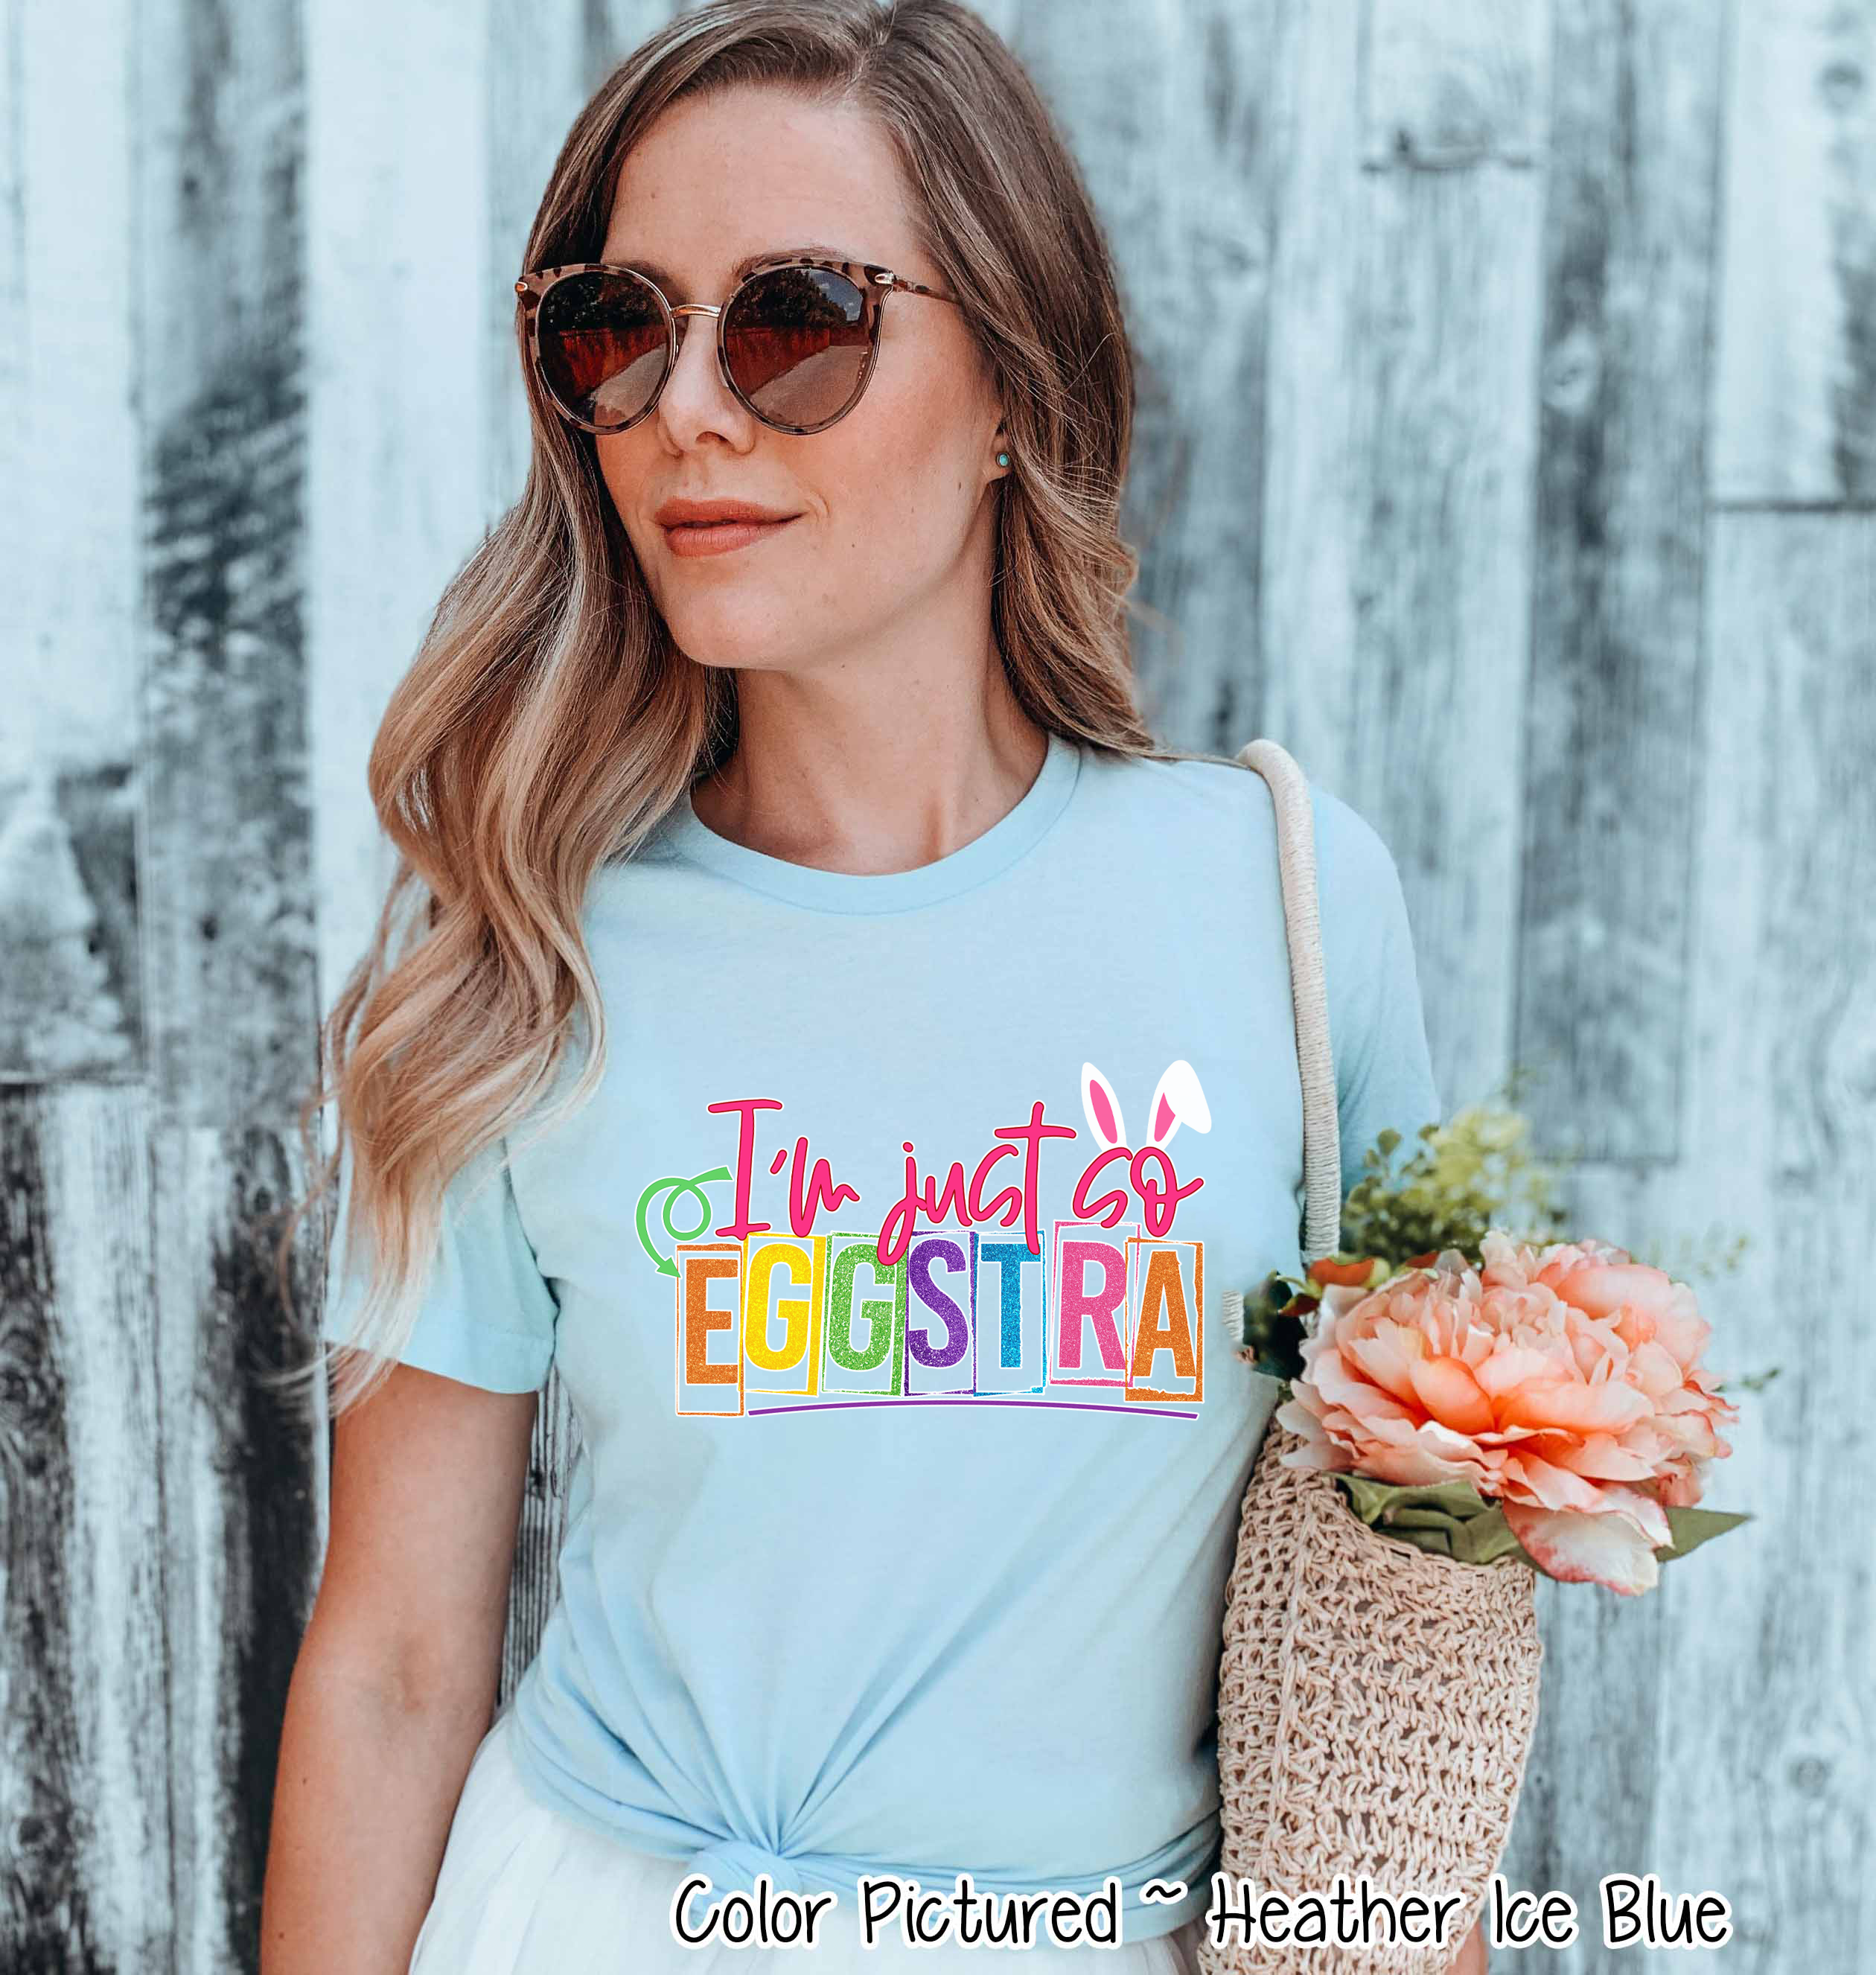 I'm Just so Eggstra Easter Tee